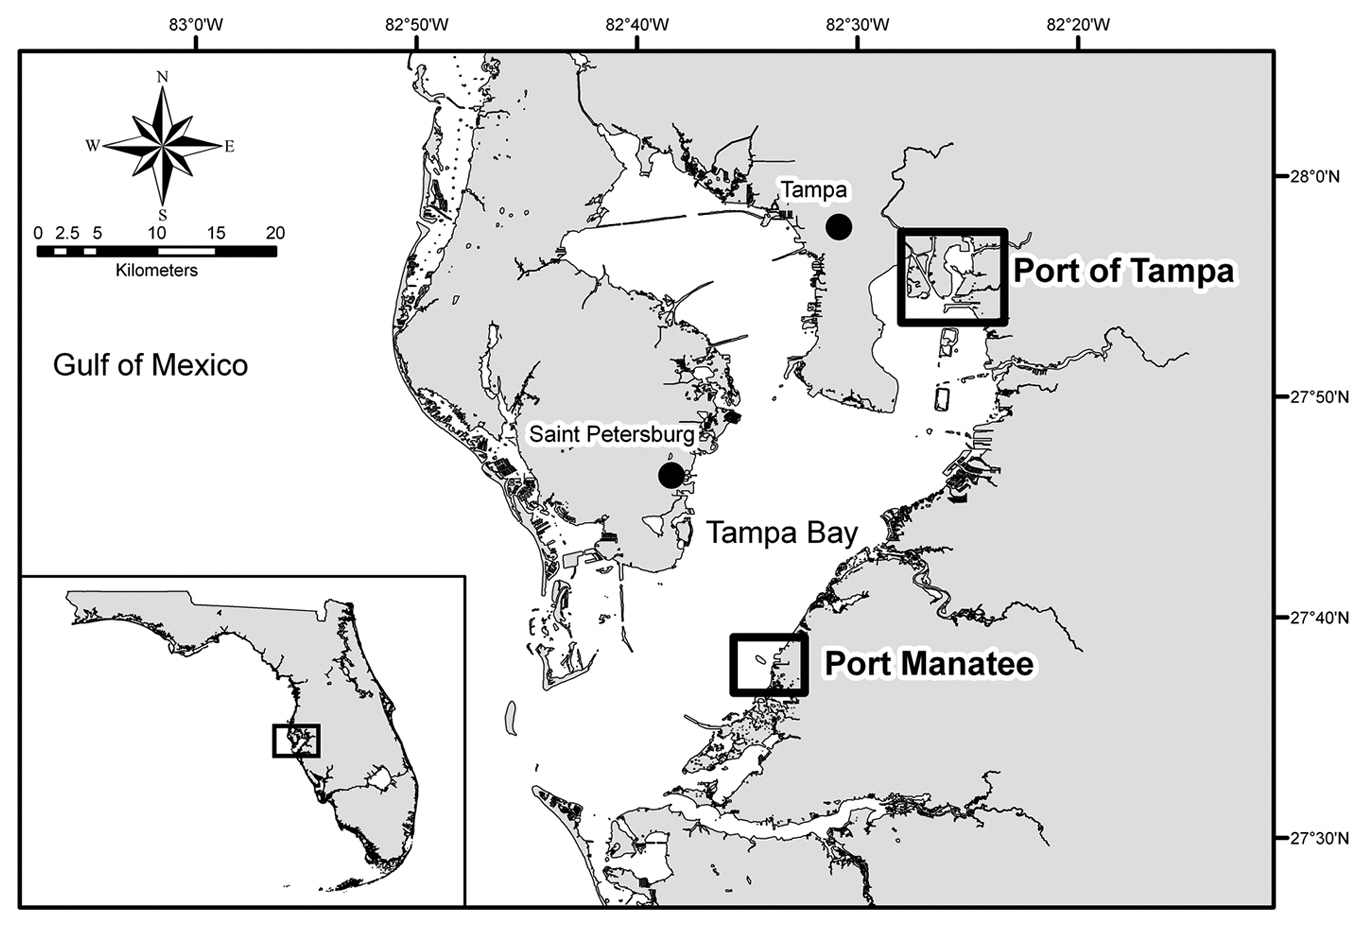 Map of Tampa Bay Florida USA showing the Port of Tampa and Port Manatee.